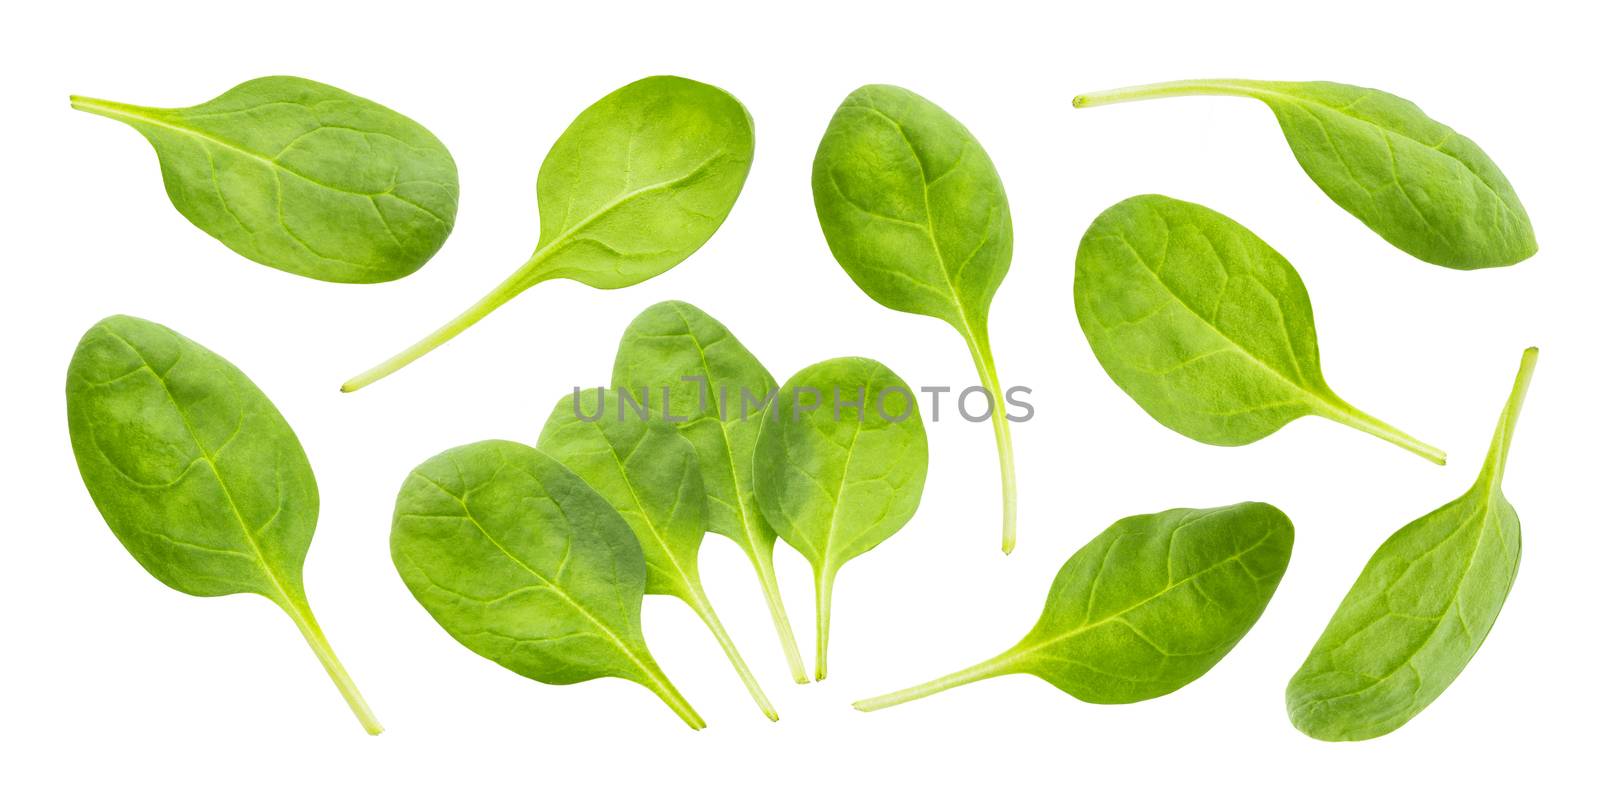 Spinach leaves isolated on white background with clipping path, close-up, collection